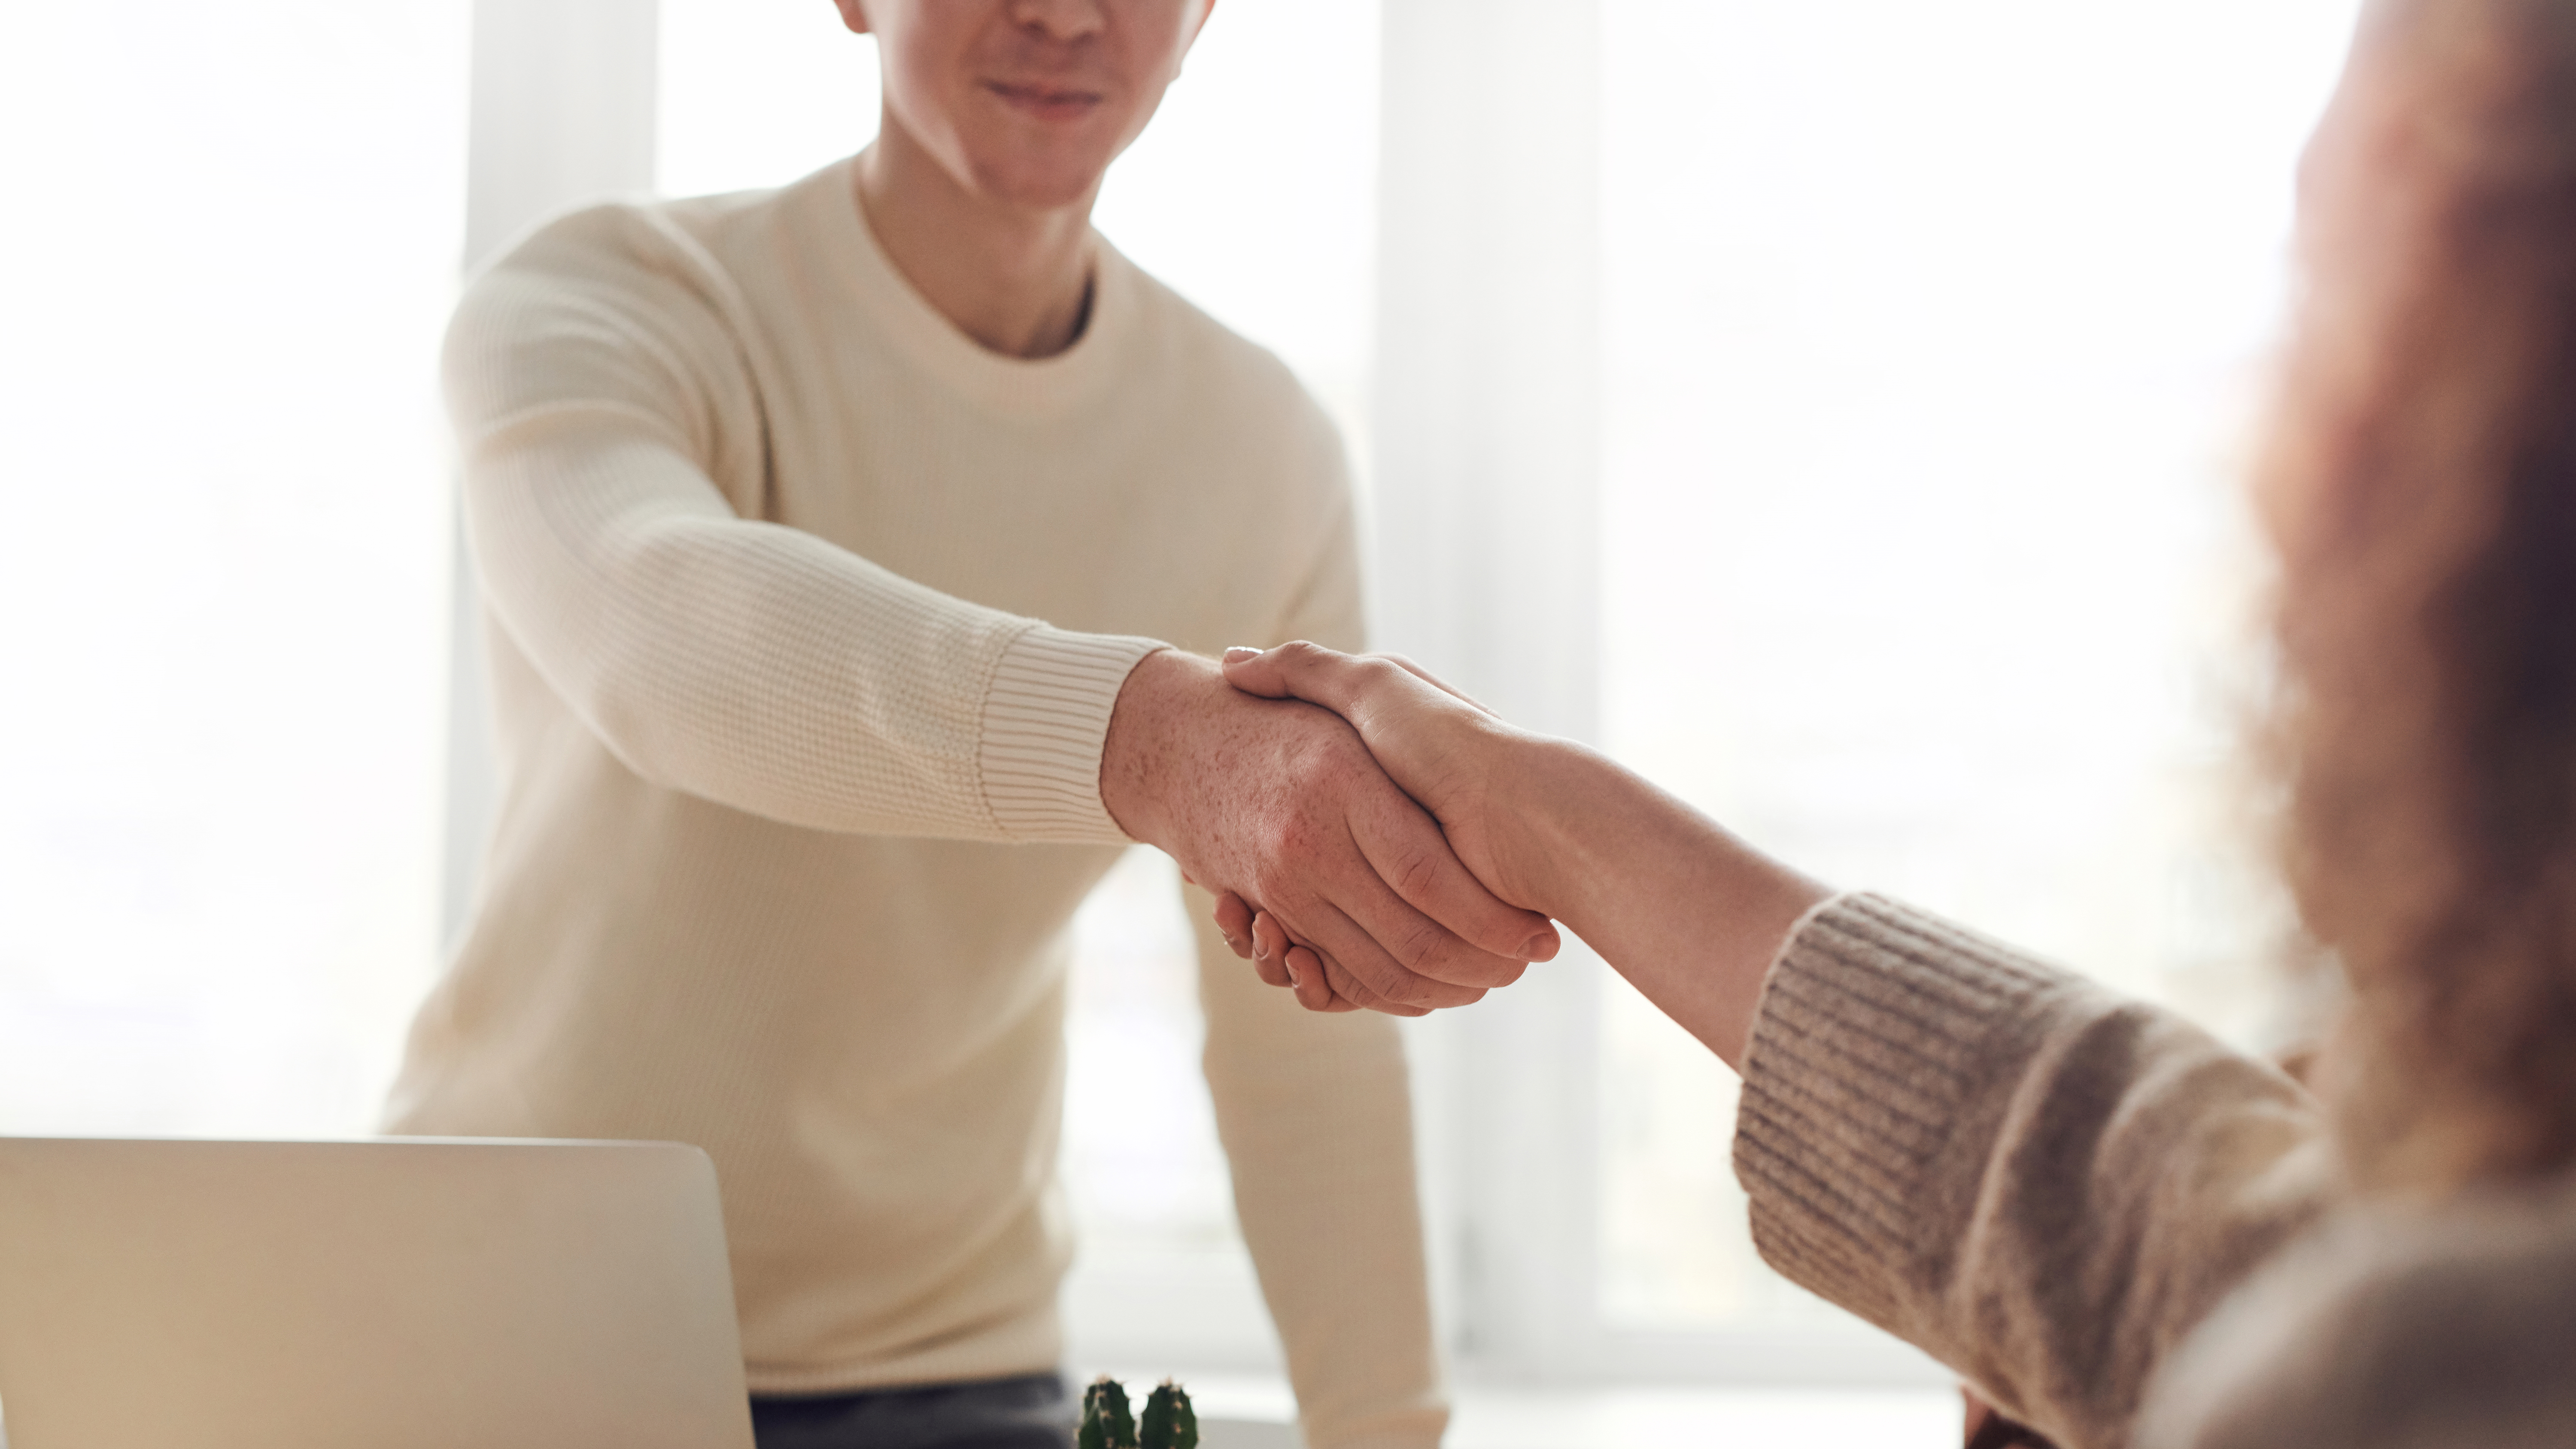 Two people shaking hands over a desk